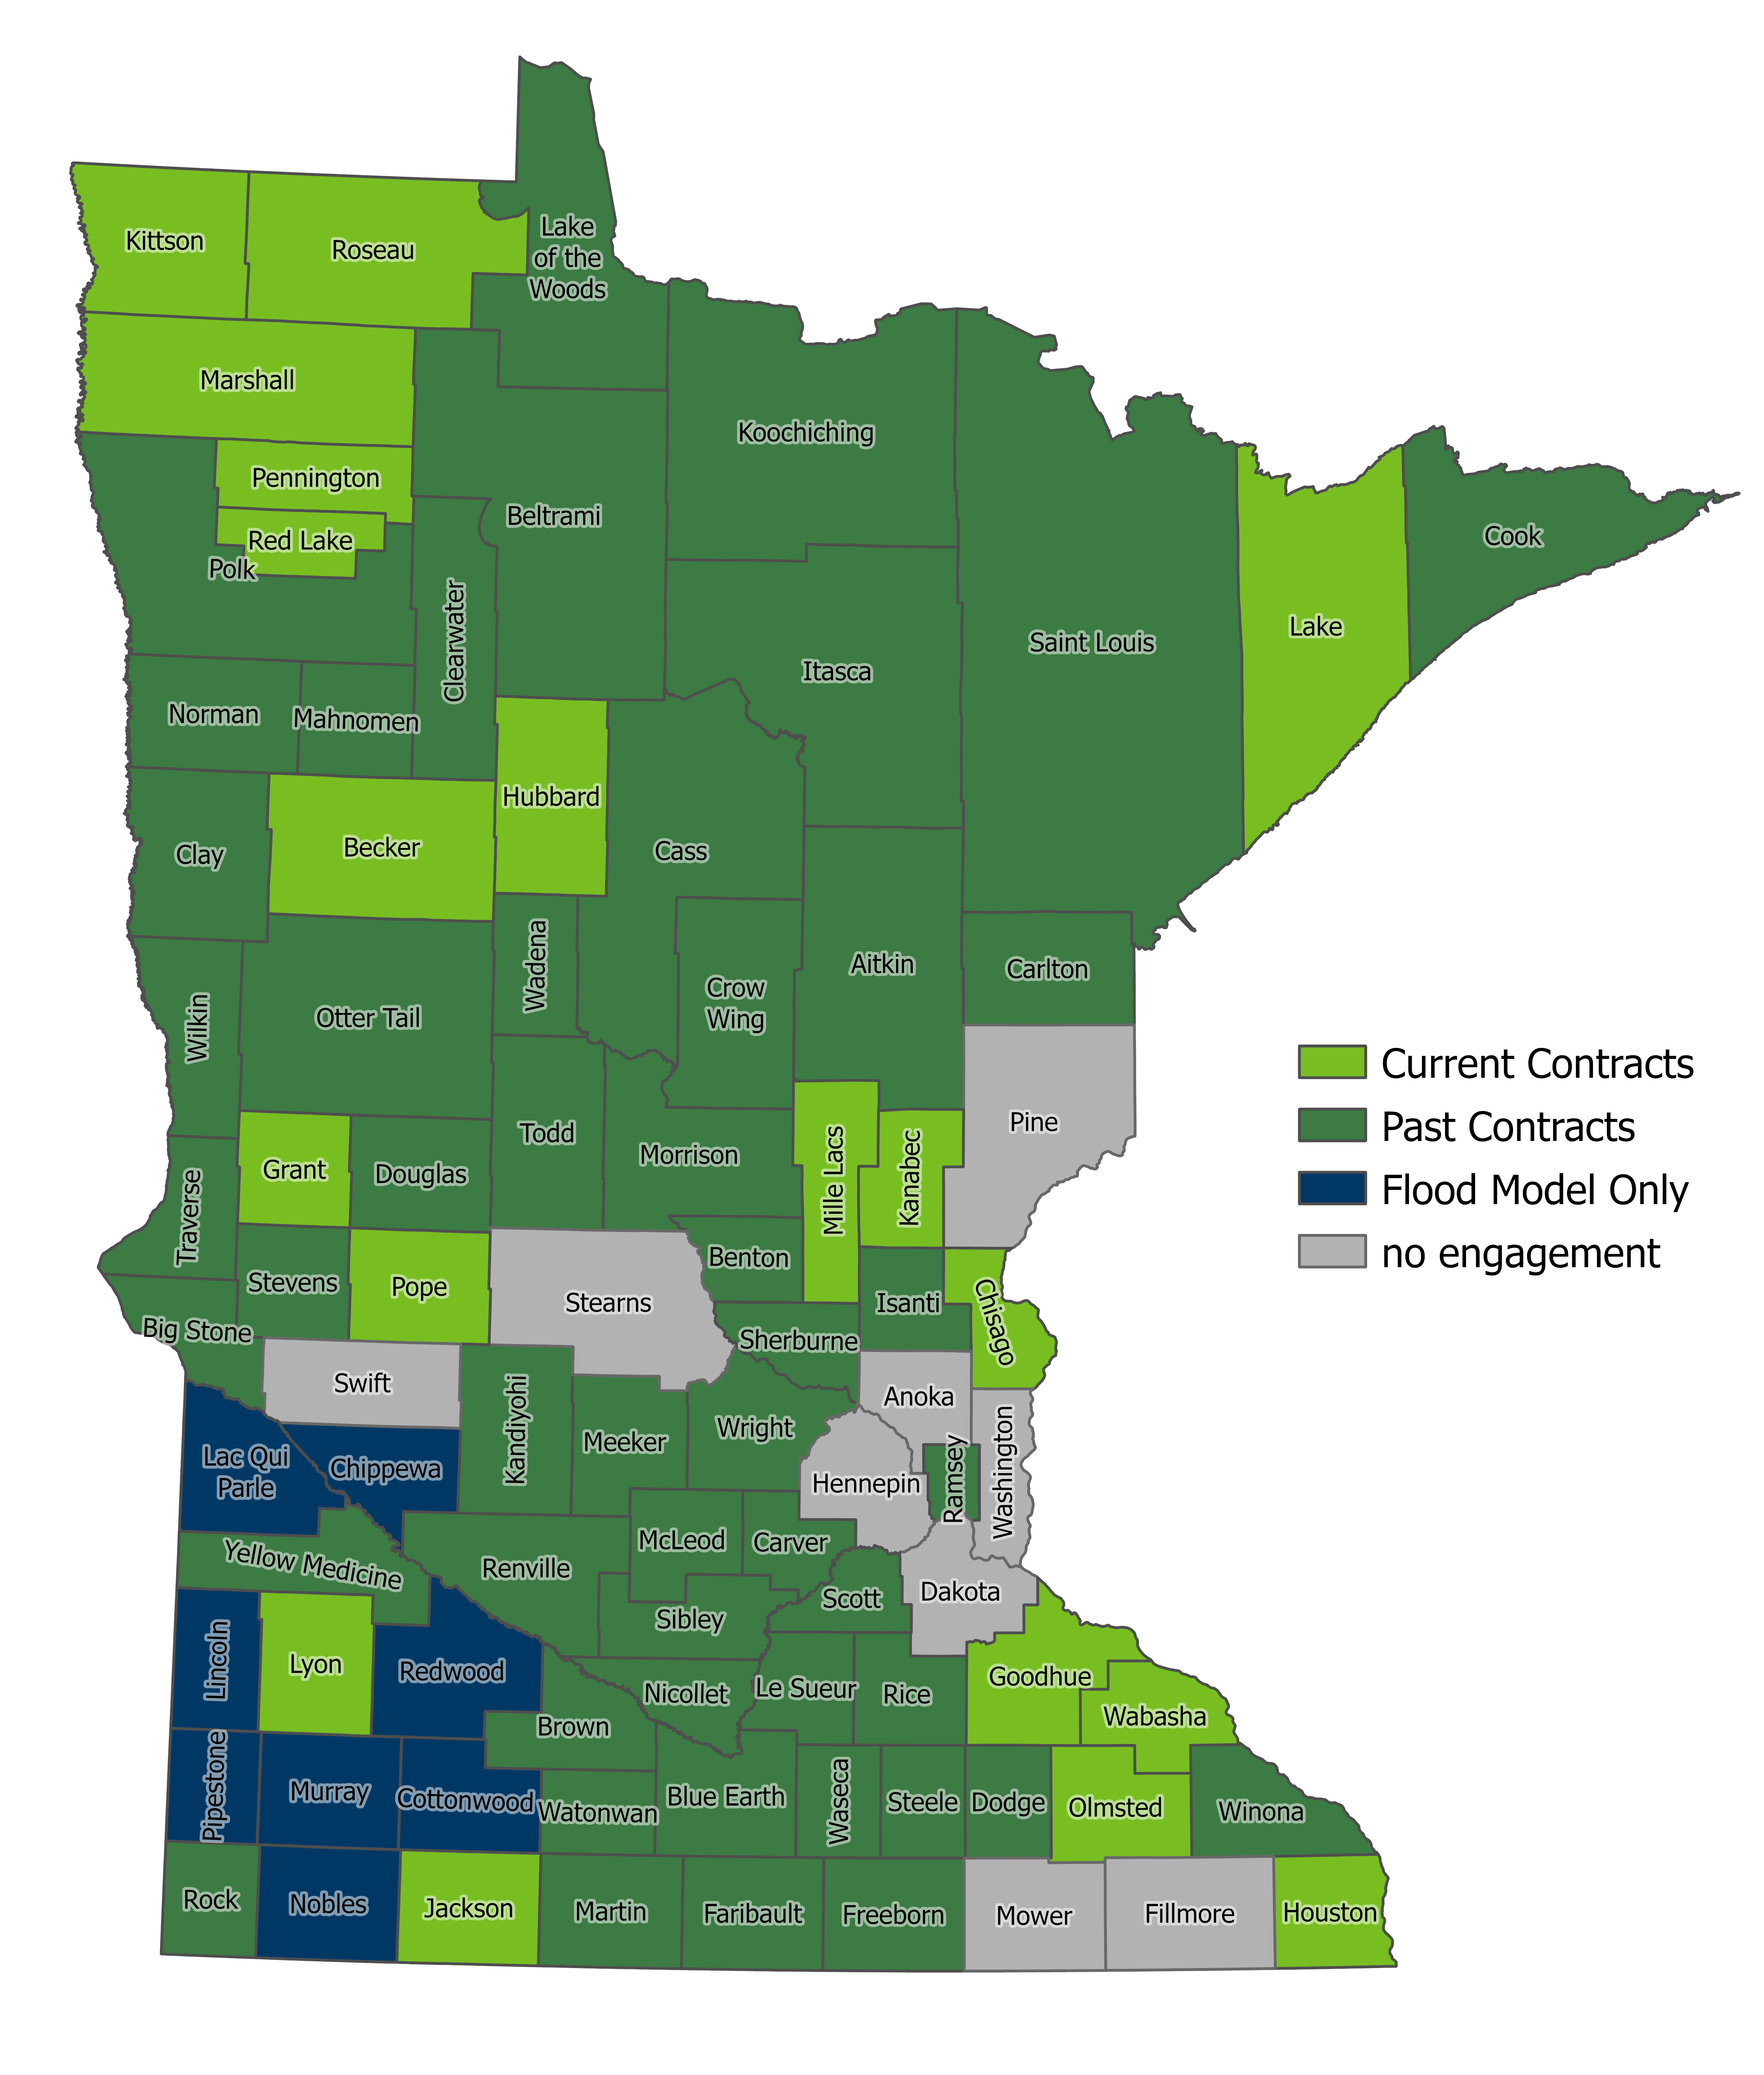 A map of Minnesota counties showing those that have worked with U-Spatial to prepare their hazard mitigation plan updates